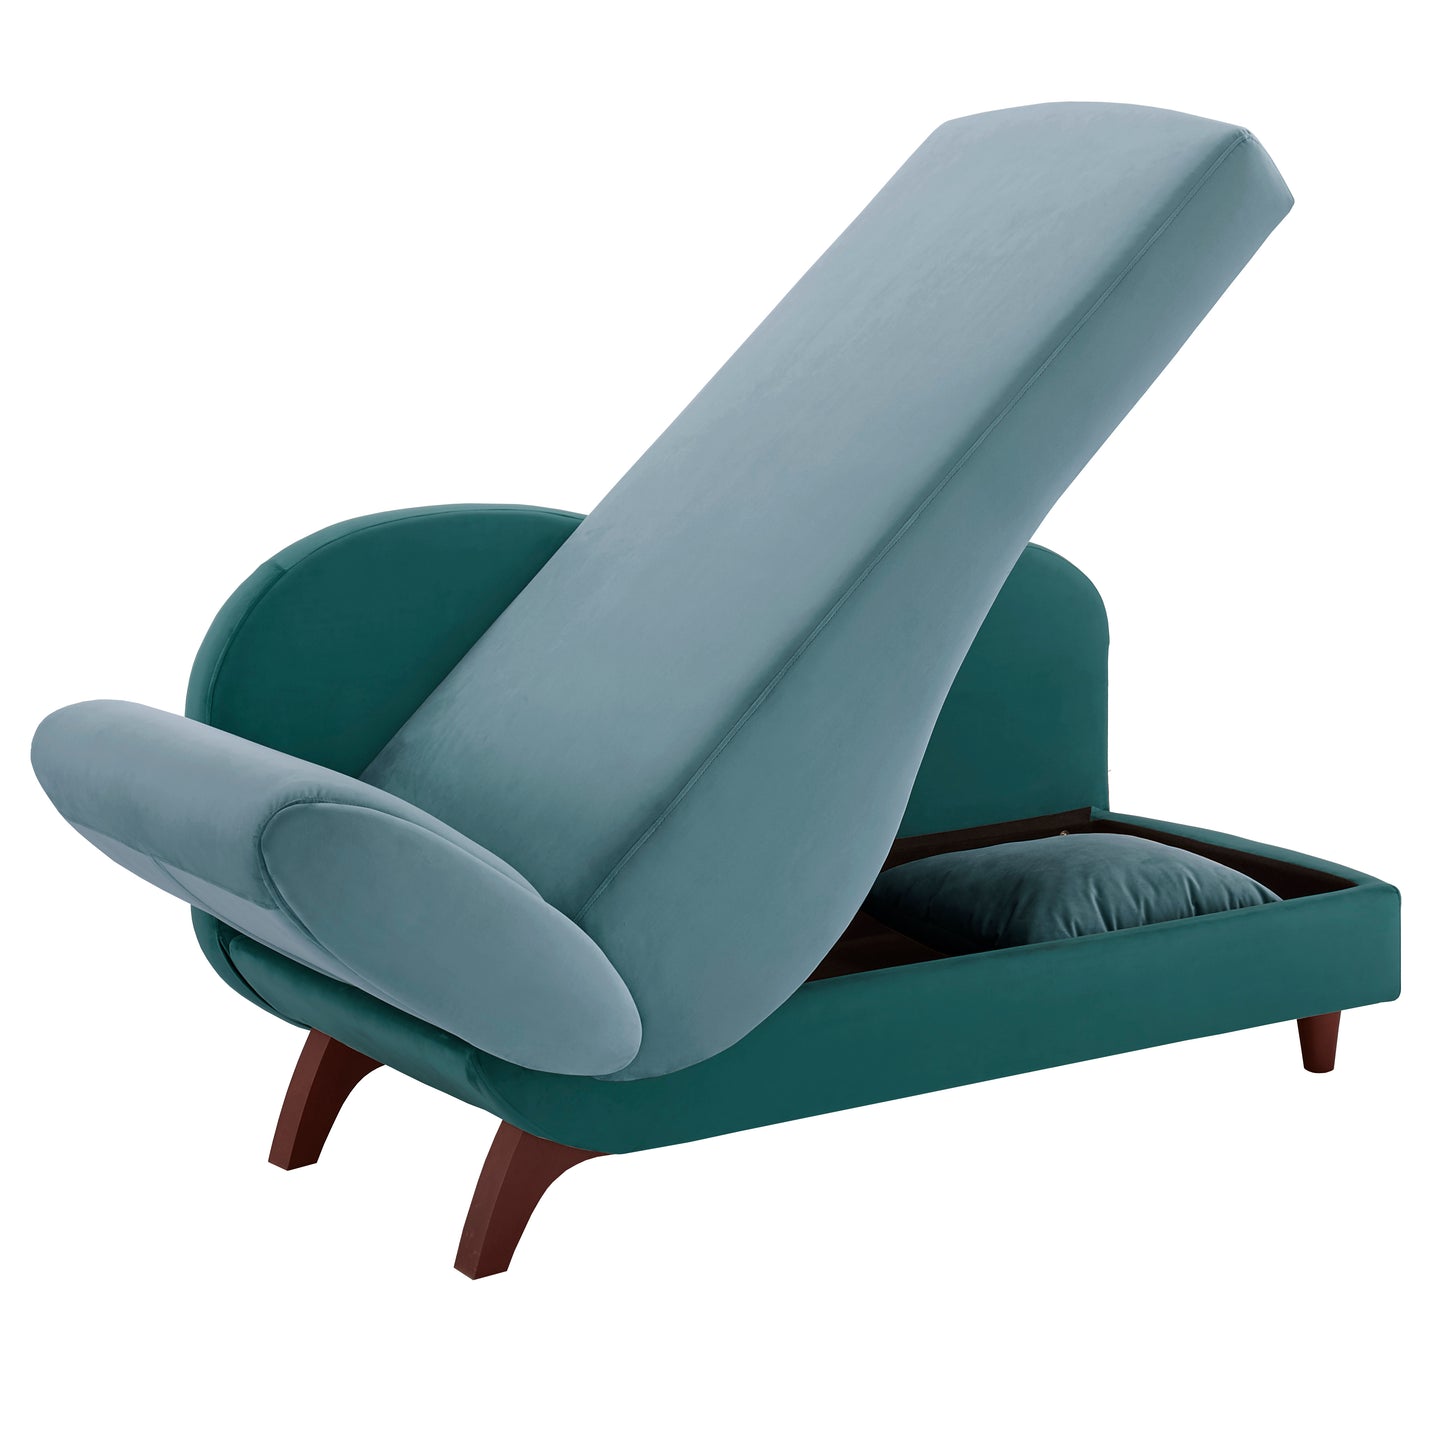 Two-Tone Dark & Light Functional Chaise With 1 Pillow - Green